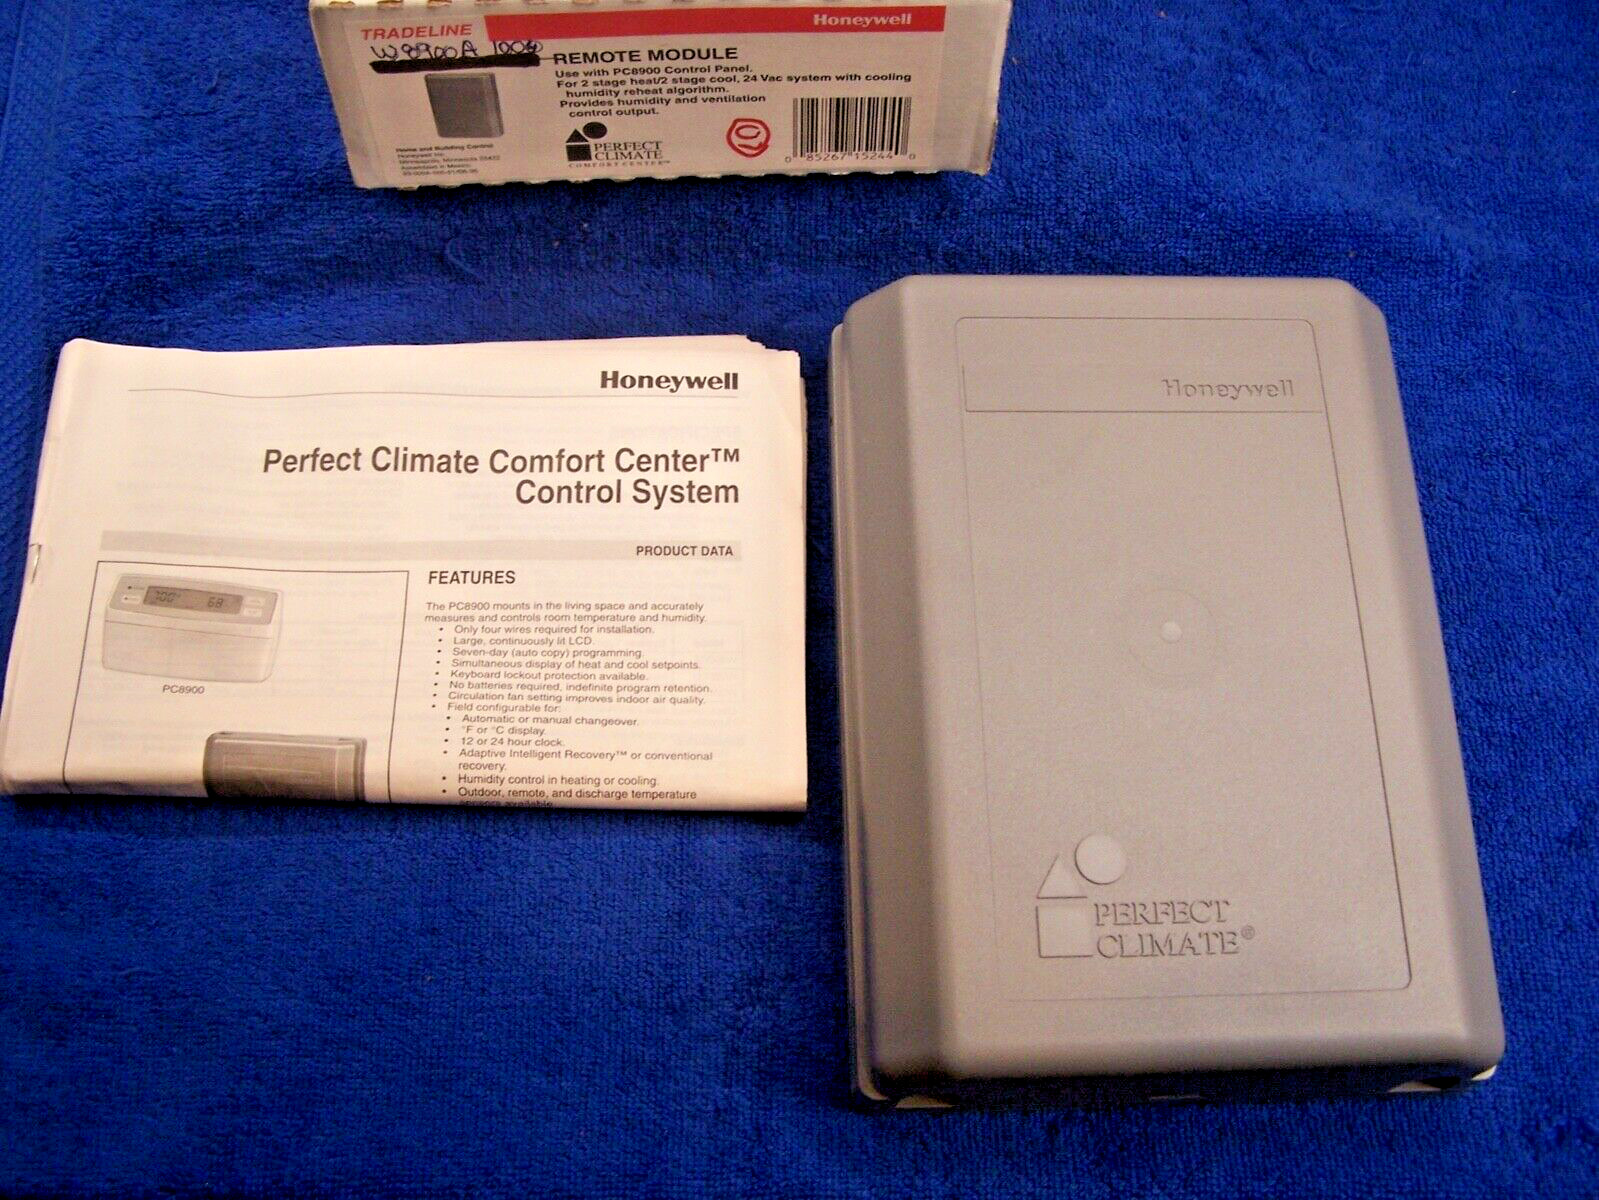 New Honeywell W8900A1004 Remote Module 2 Stage Heat/Cool Conventional 24V